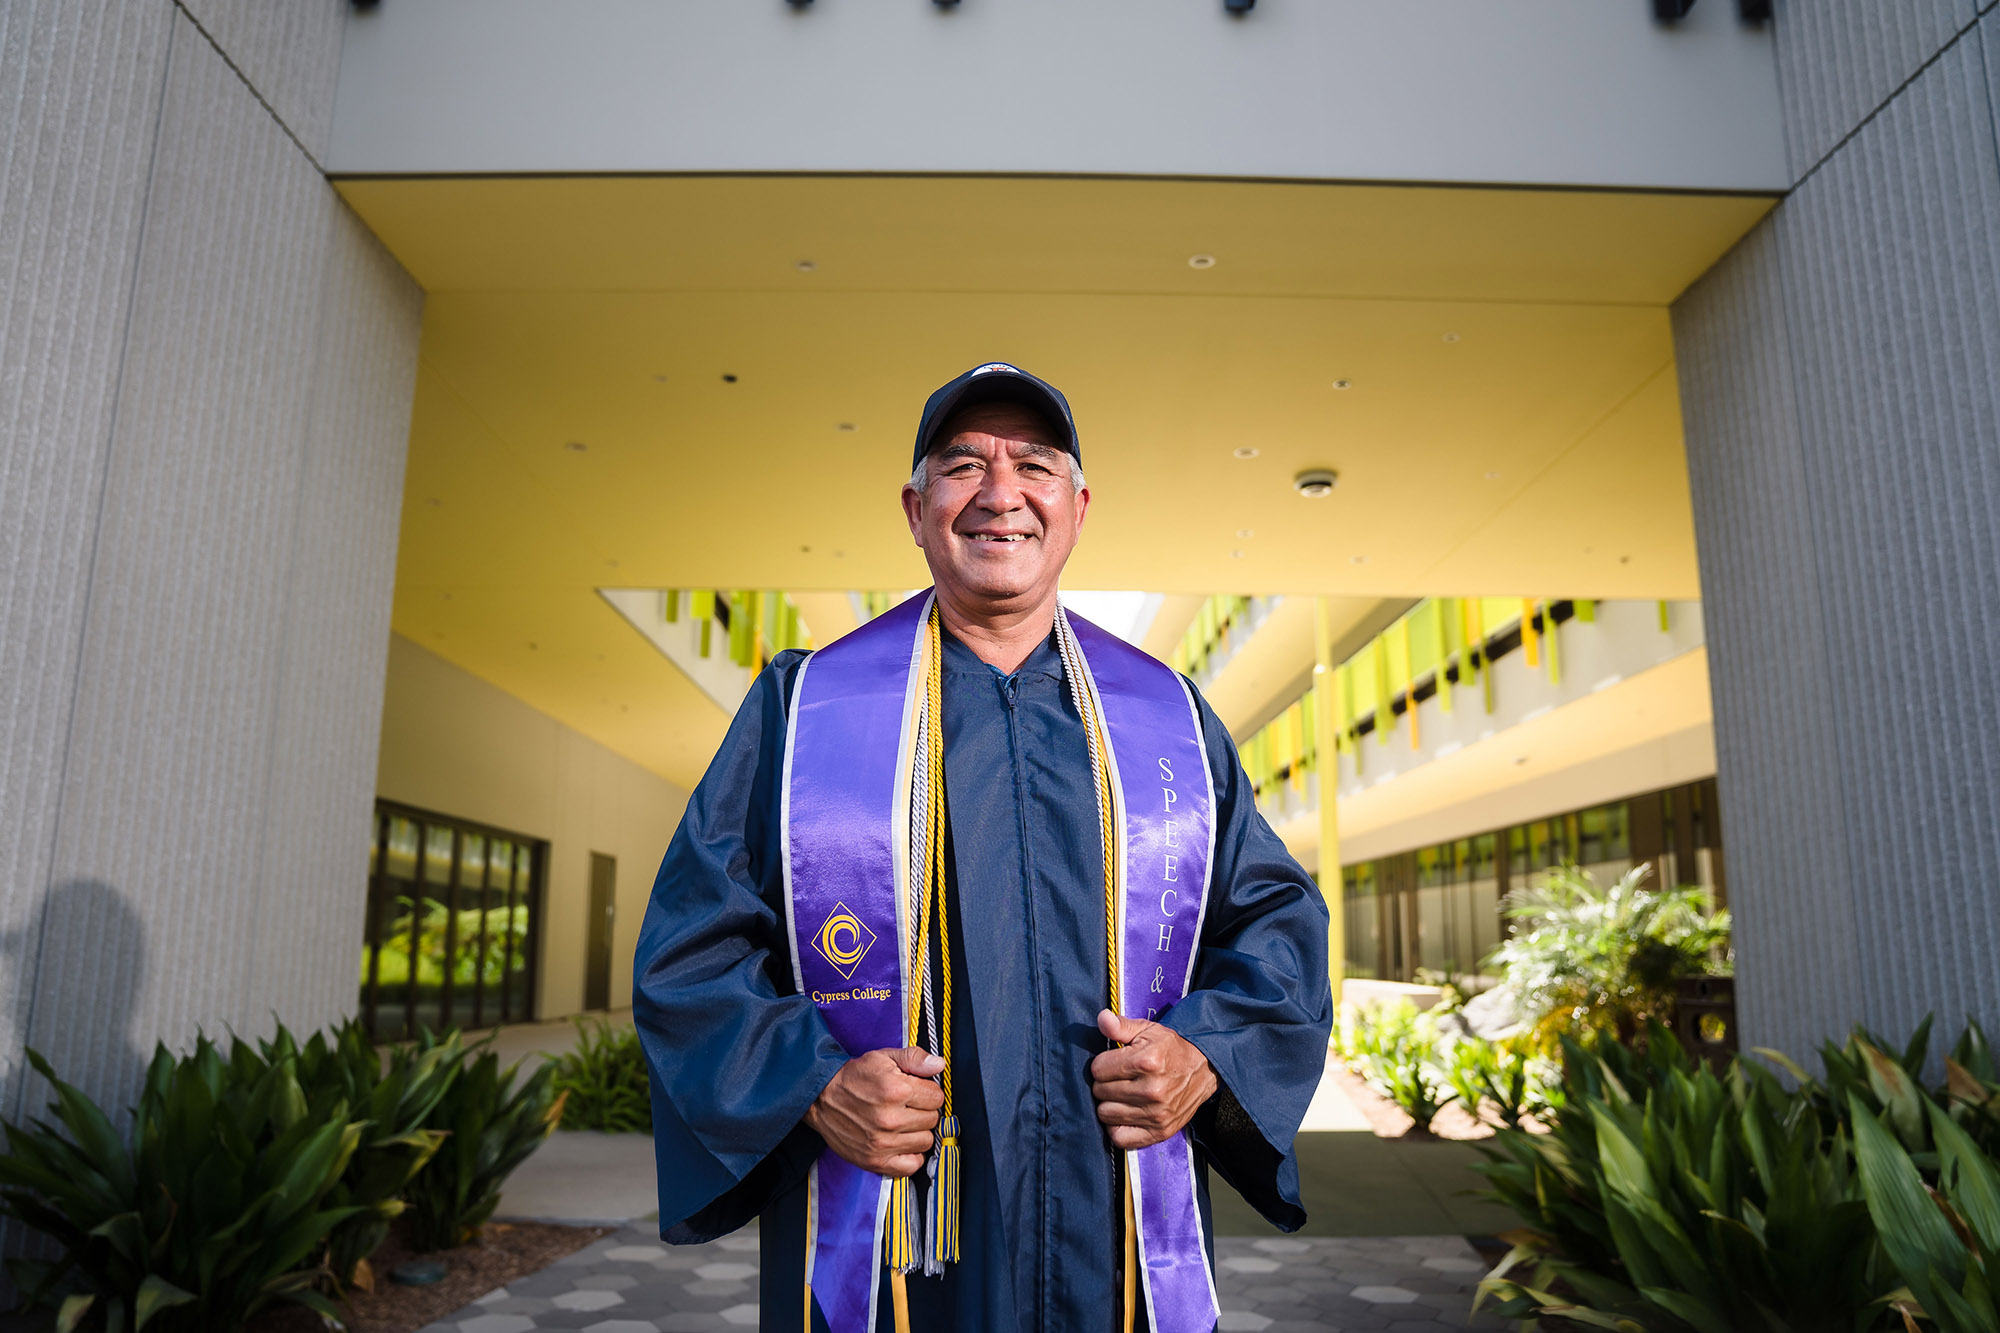 An older man in graduation regalia with honors cords and sashes poses in front of the Cypress College science building. 